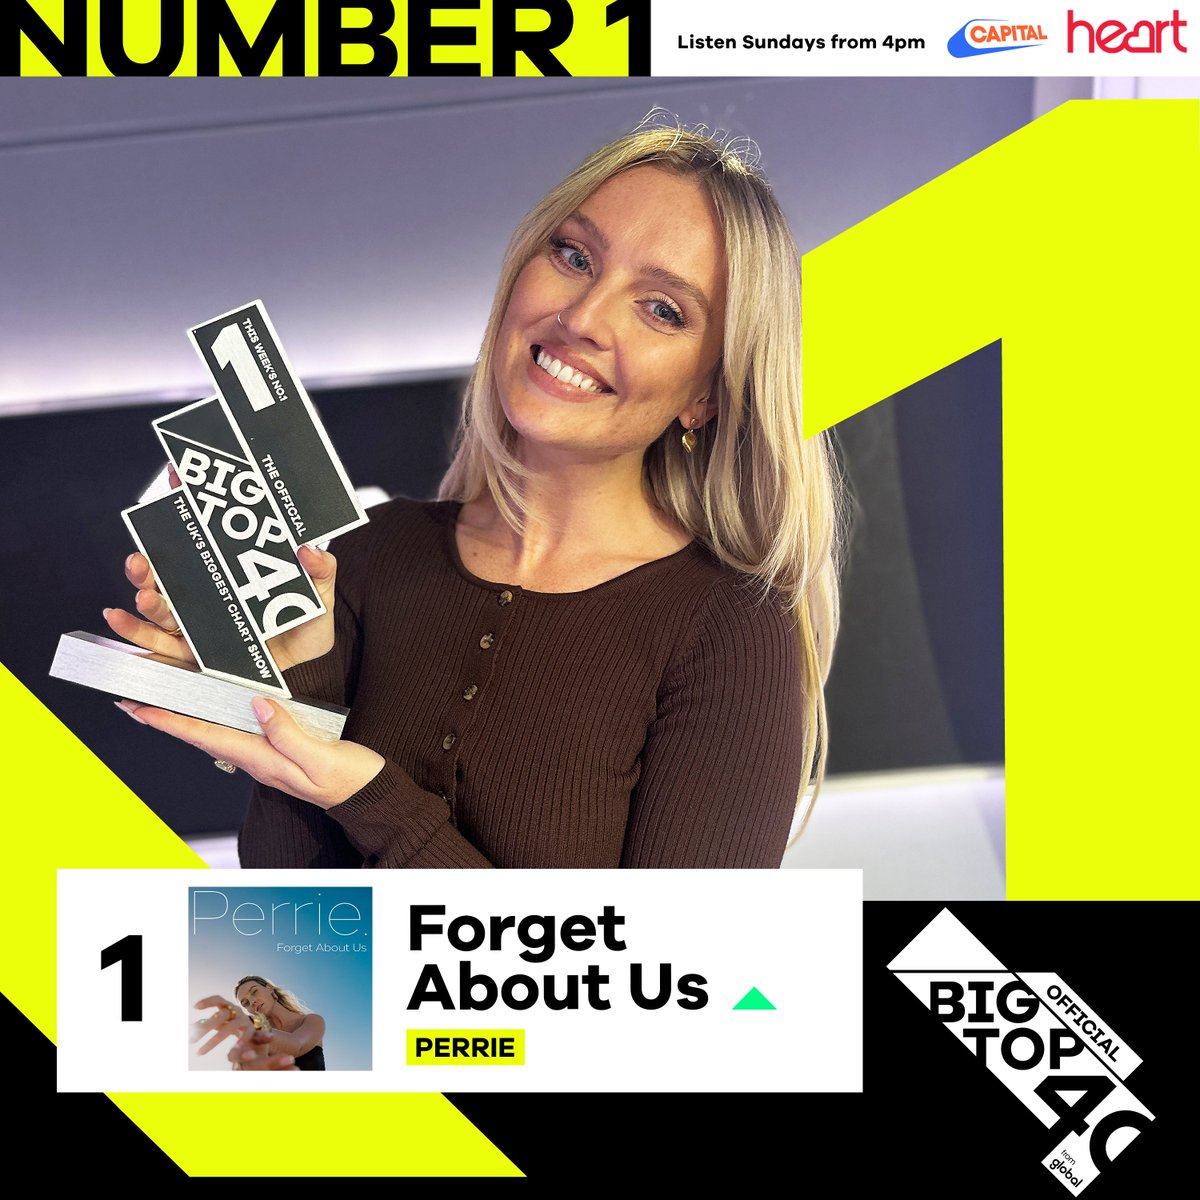 PERRIE HAS DONE IT! 🥳 With her debut solo single 'Forget About Us', she's knocked @Beyonce's 'TEXAS HOLD EM' off the top spot! 🏆